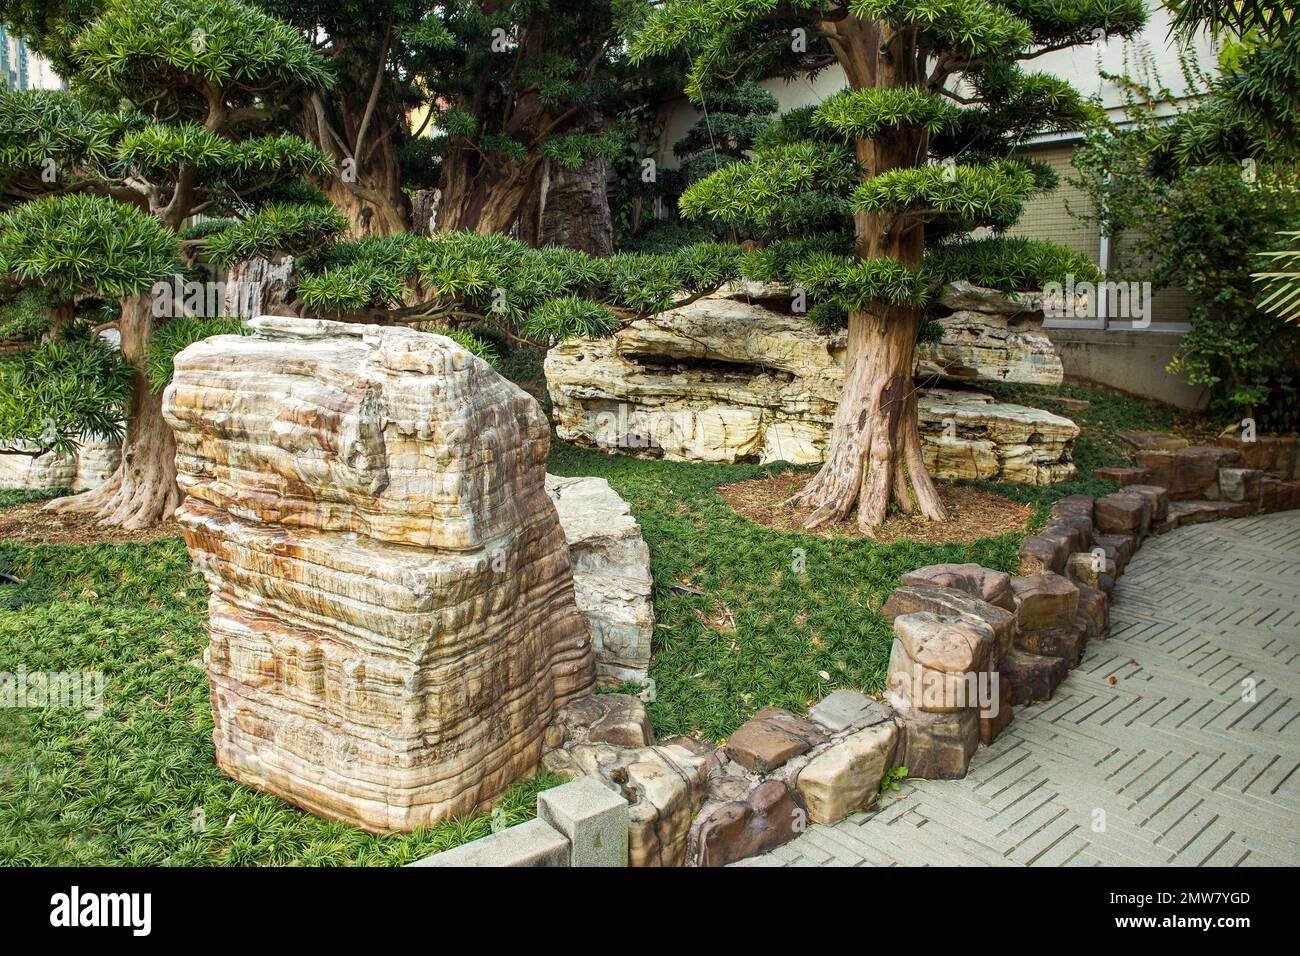 Superb View of the rocks (Taihu stone)  in Nan Lian Park with idyllic topiary podocarpus and pine trees and ophiopogon japonicus as grass in Chinese p Stock Photo